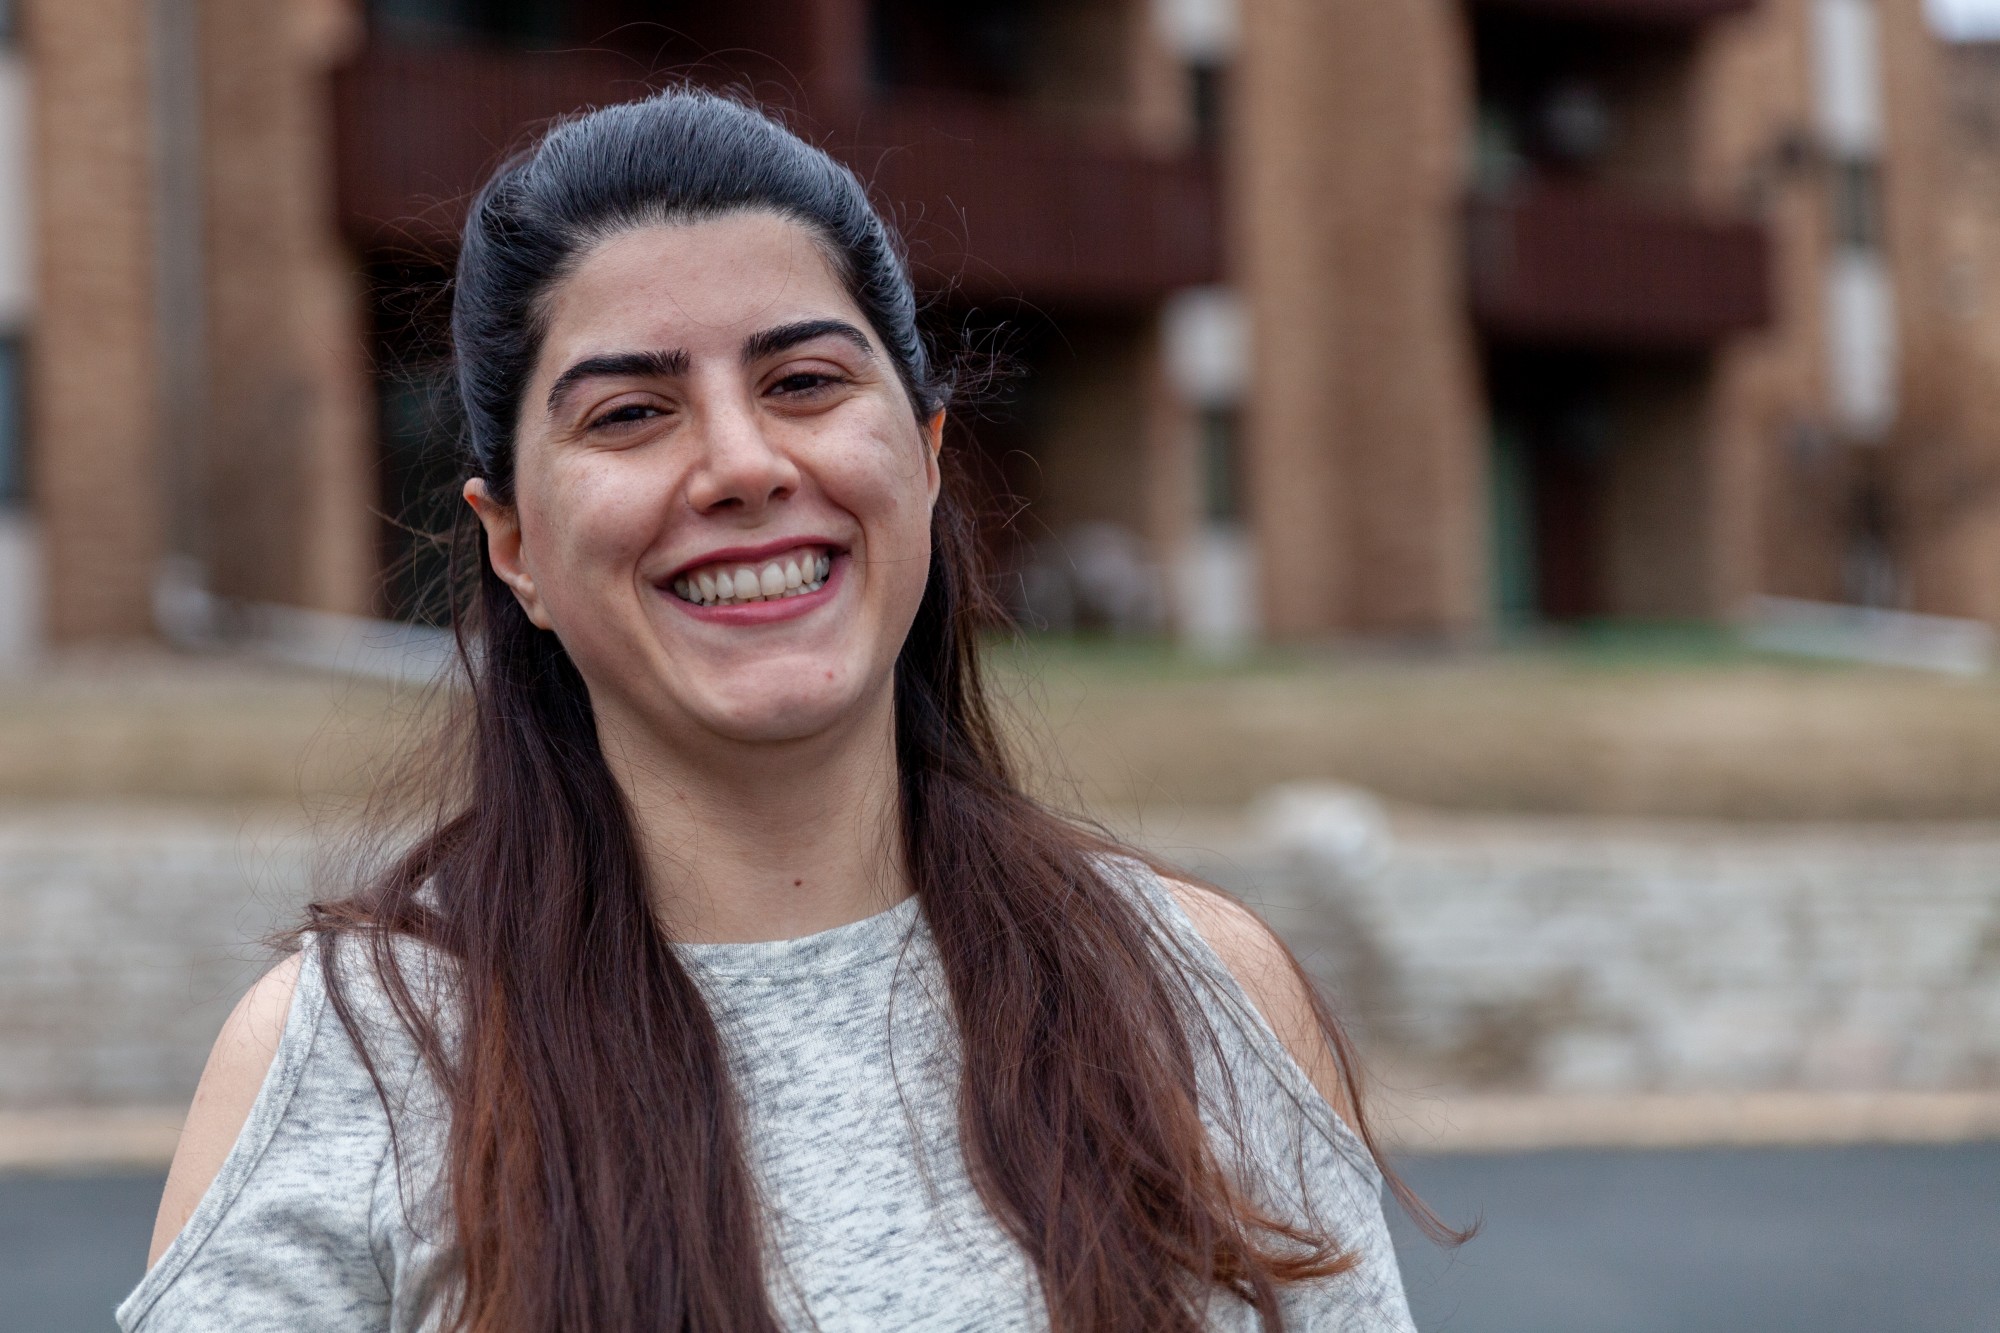 Senior Maryam Zahedi poses for a portrait at her apartment in Roseville on Saturday, March 21. The Persian New Year, traditionally celebrated with gatherings of friends and family, has been greatly impacted by restrictions on human interaction implemented in response to COVID-19.